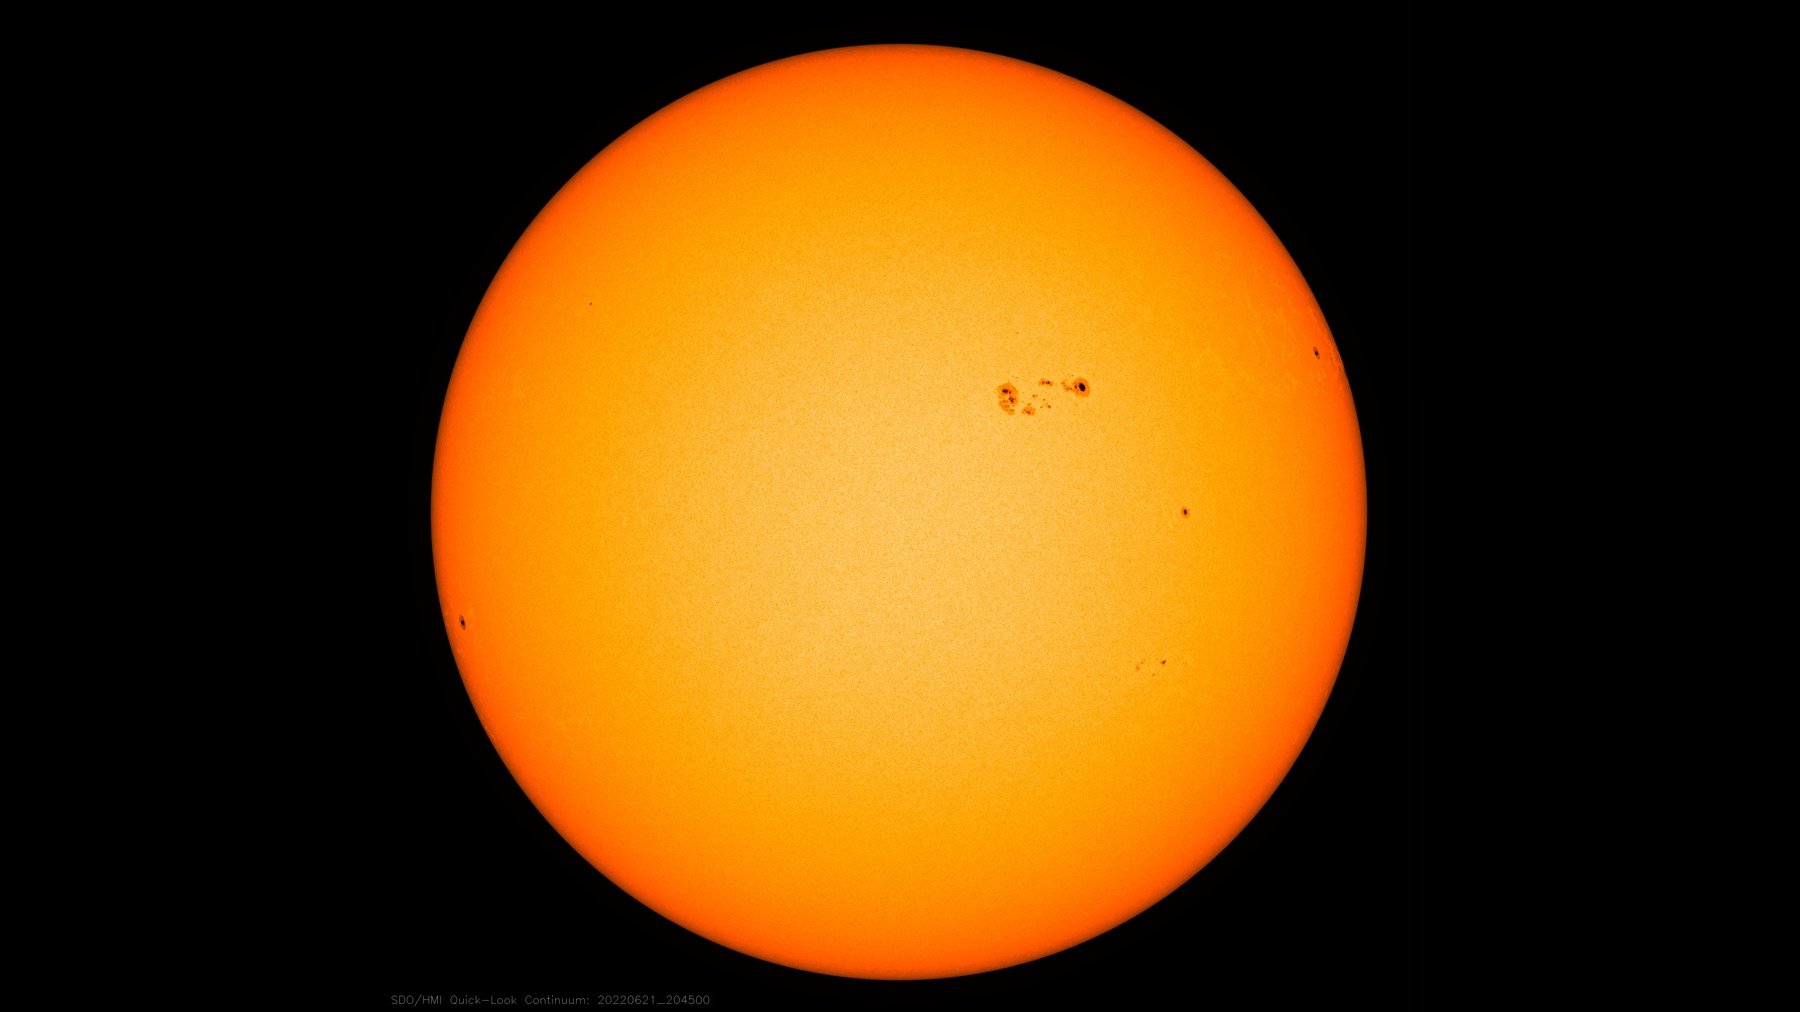 A giant sunspot the size of 3 Earths is facing us right now thumbnail